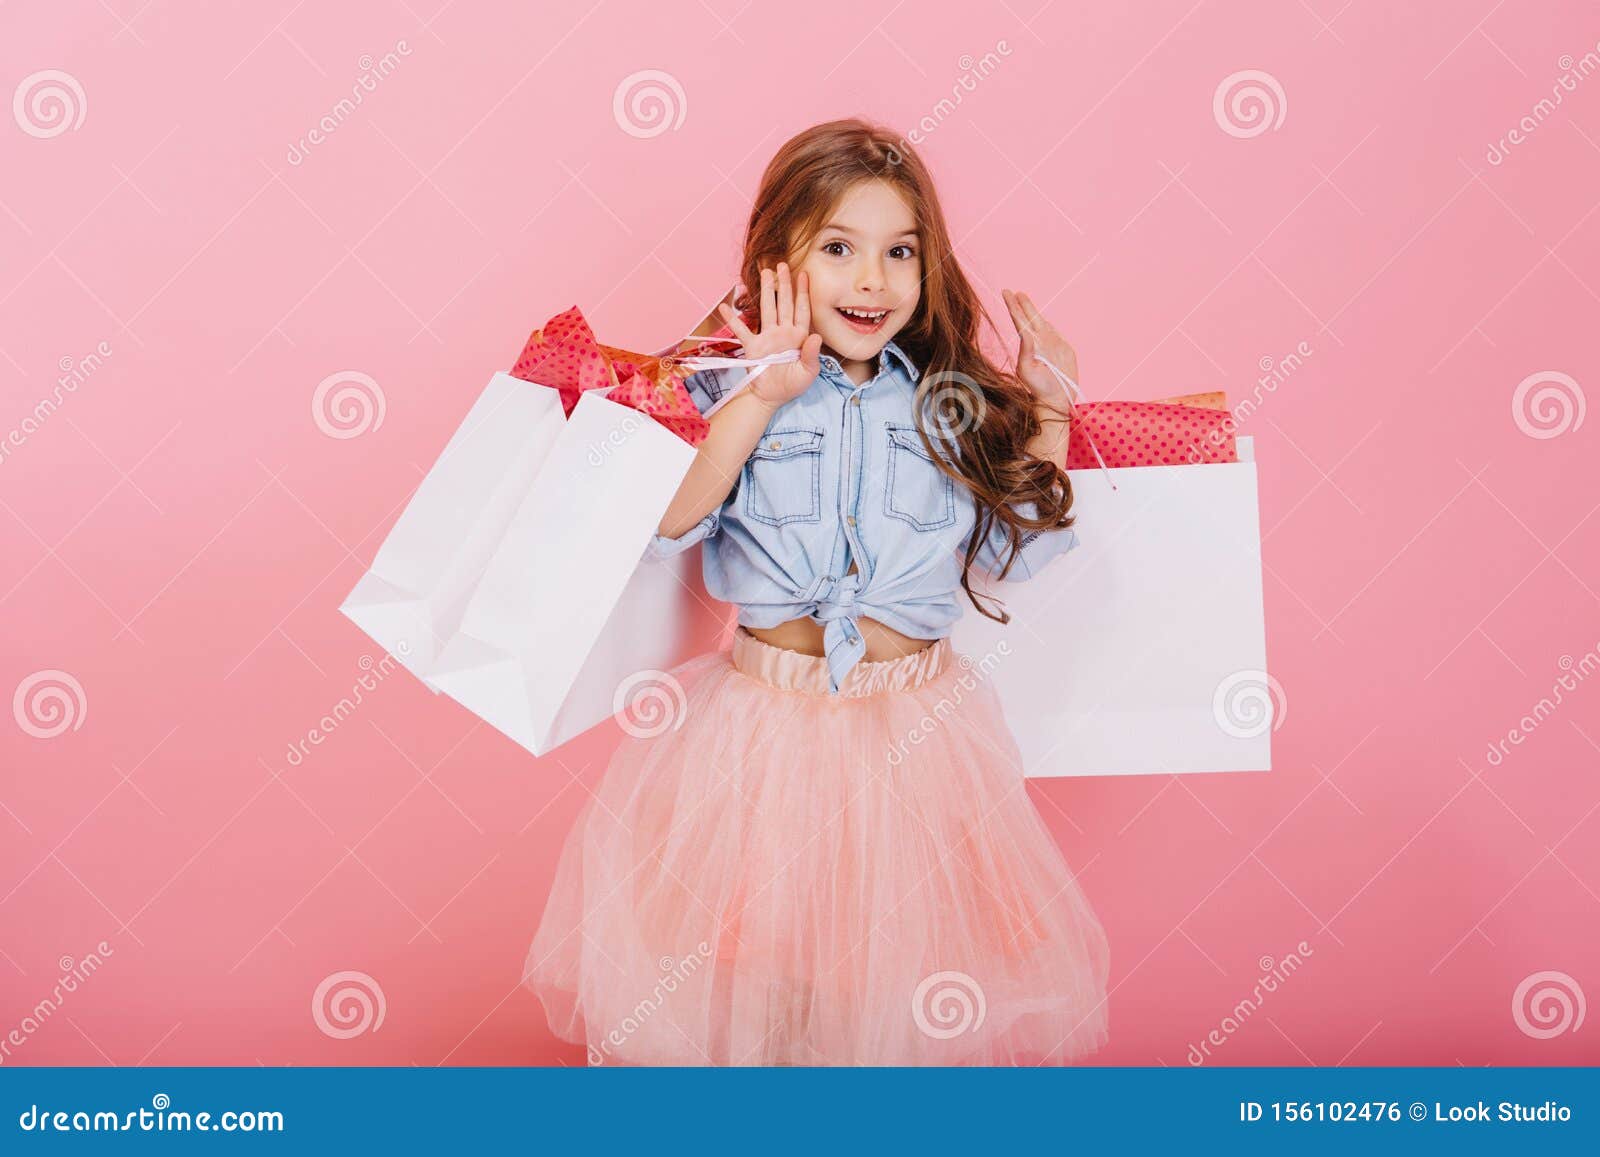 pretty joyful young girl in tulle skirt, with long brunette hair walking with white packages on pink background. lovely